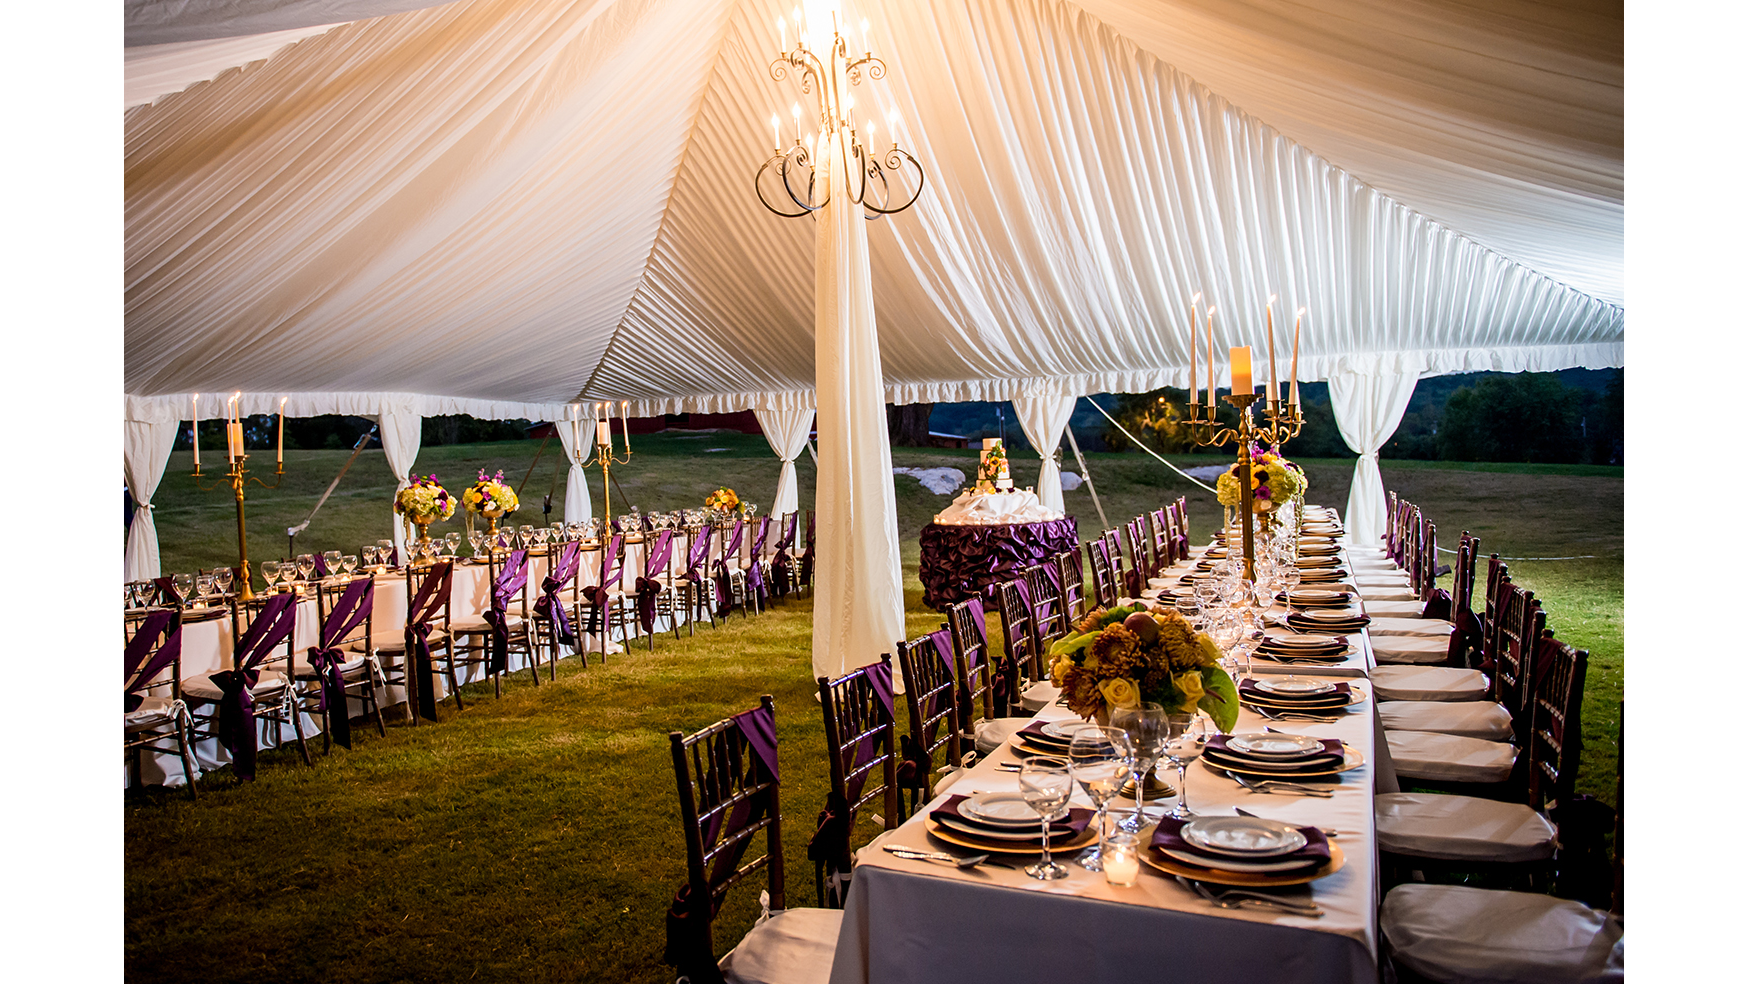 WEDDING TENT PACKAGES